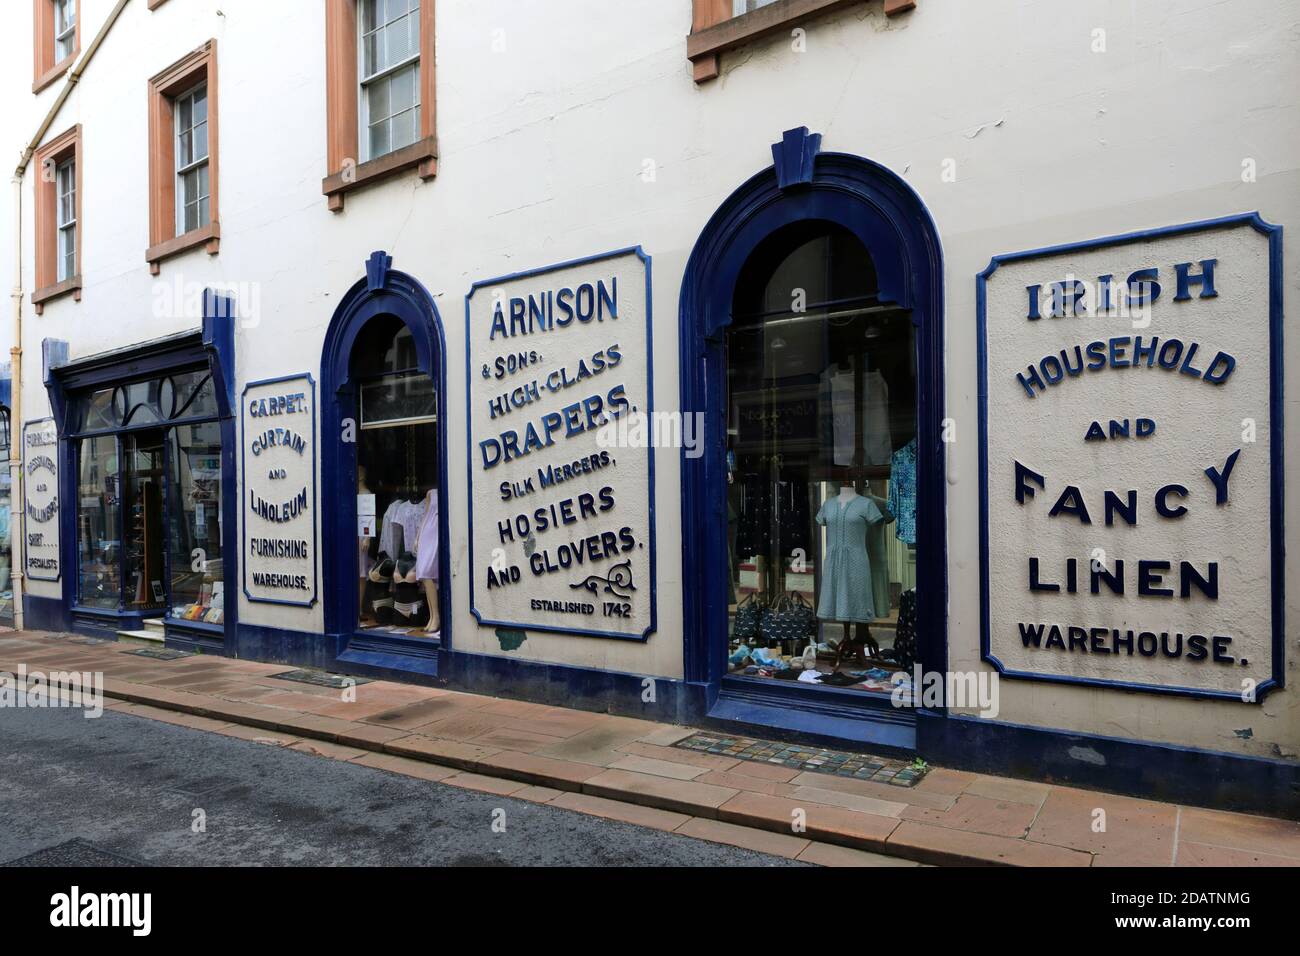 The Arnison shop and architecture in Penrith town centre, Cumbria, England, UK Stock Photo